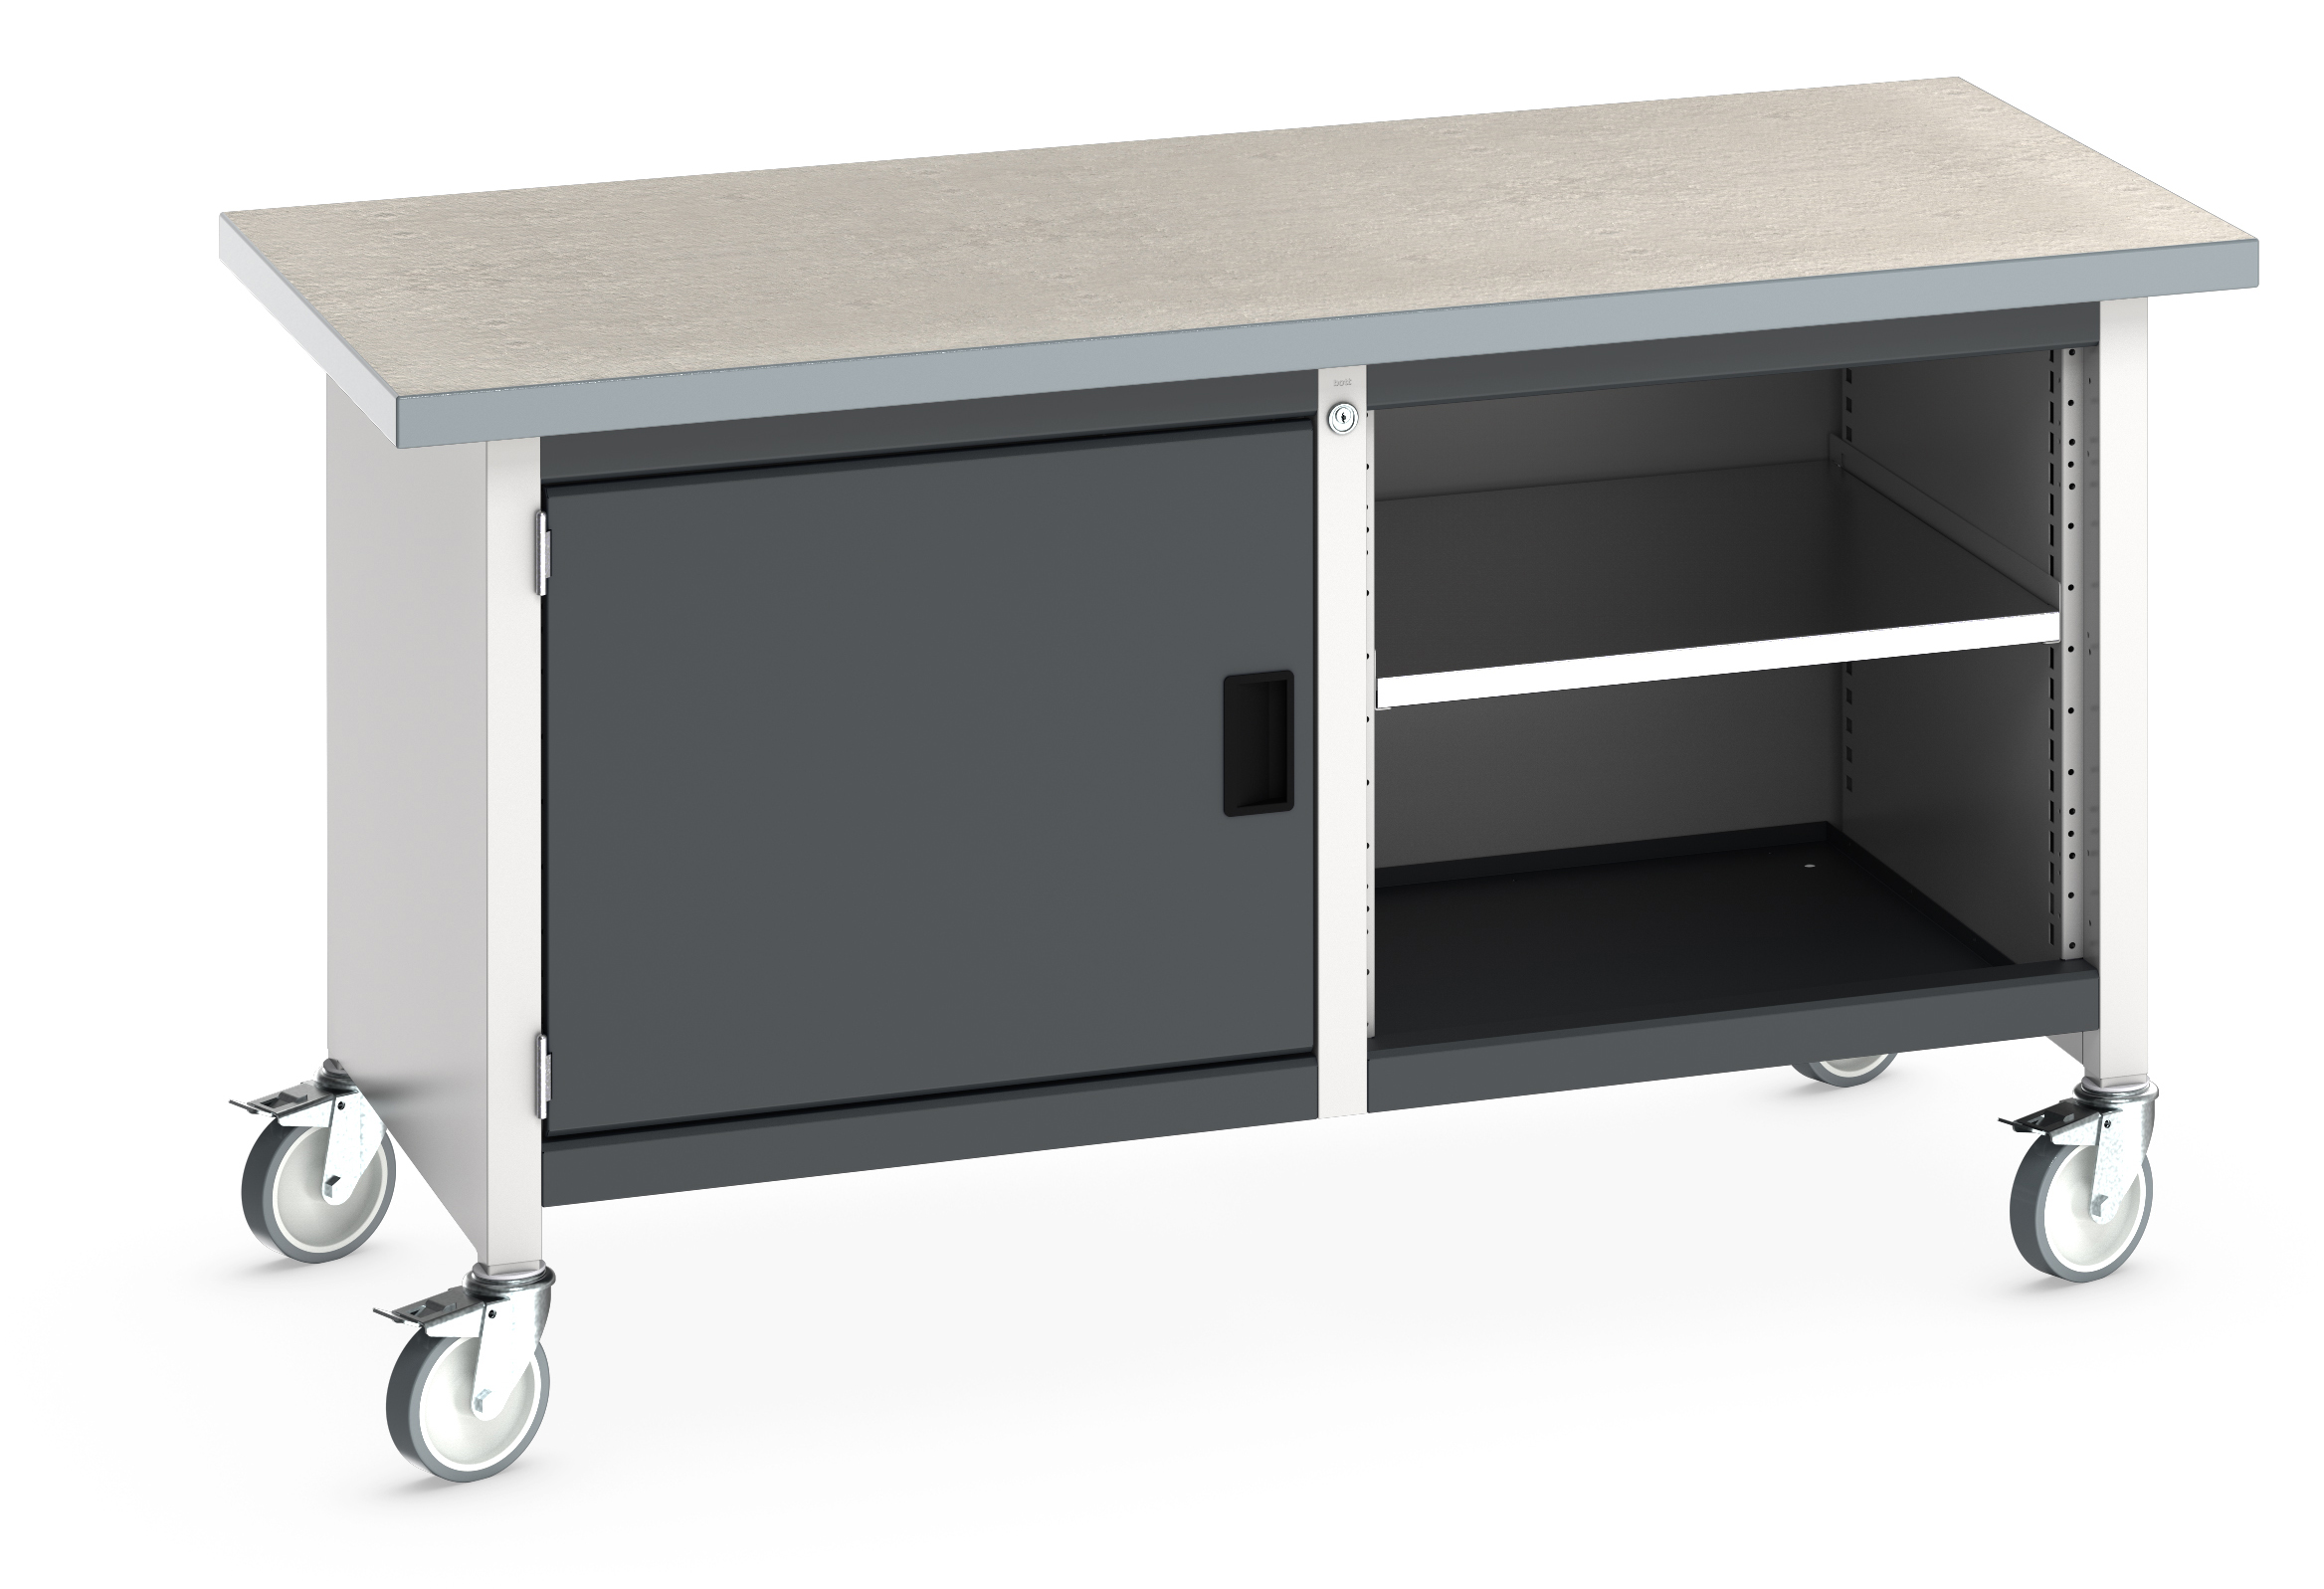 Bott Cubio Mobile Storage Bench With Full Cupboard / Open Cupboard - 41002096.19V